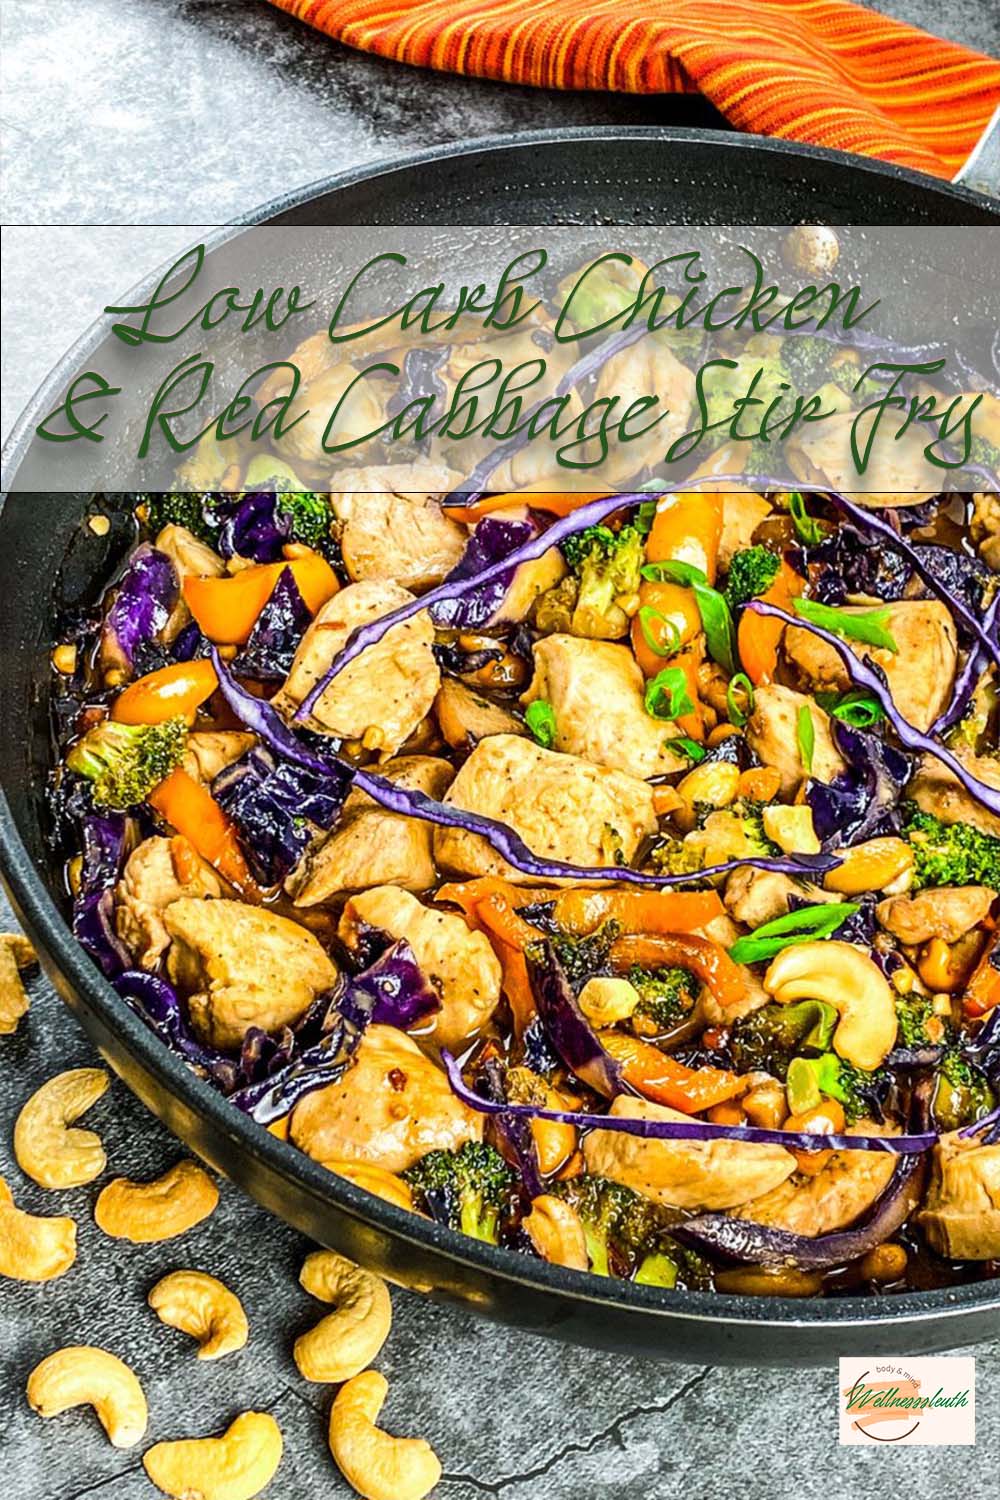 Low Carb Chicken & Red Cabbage Stir Fry